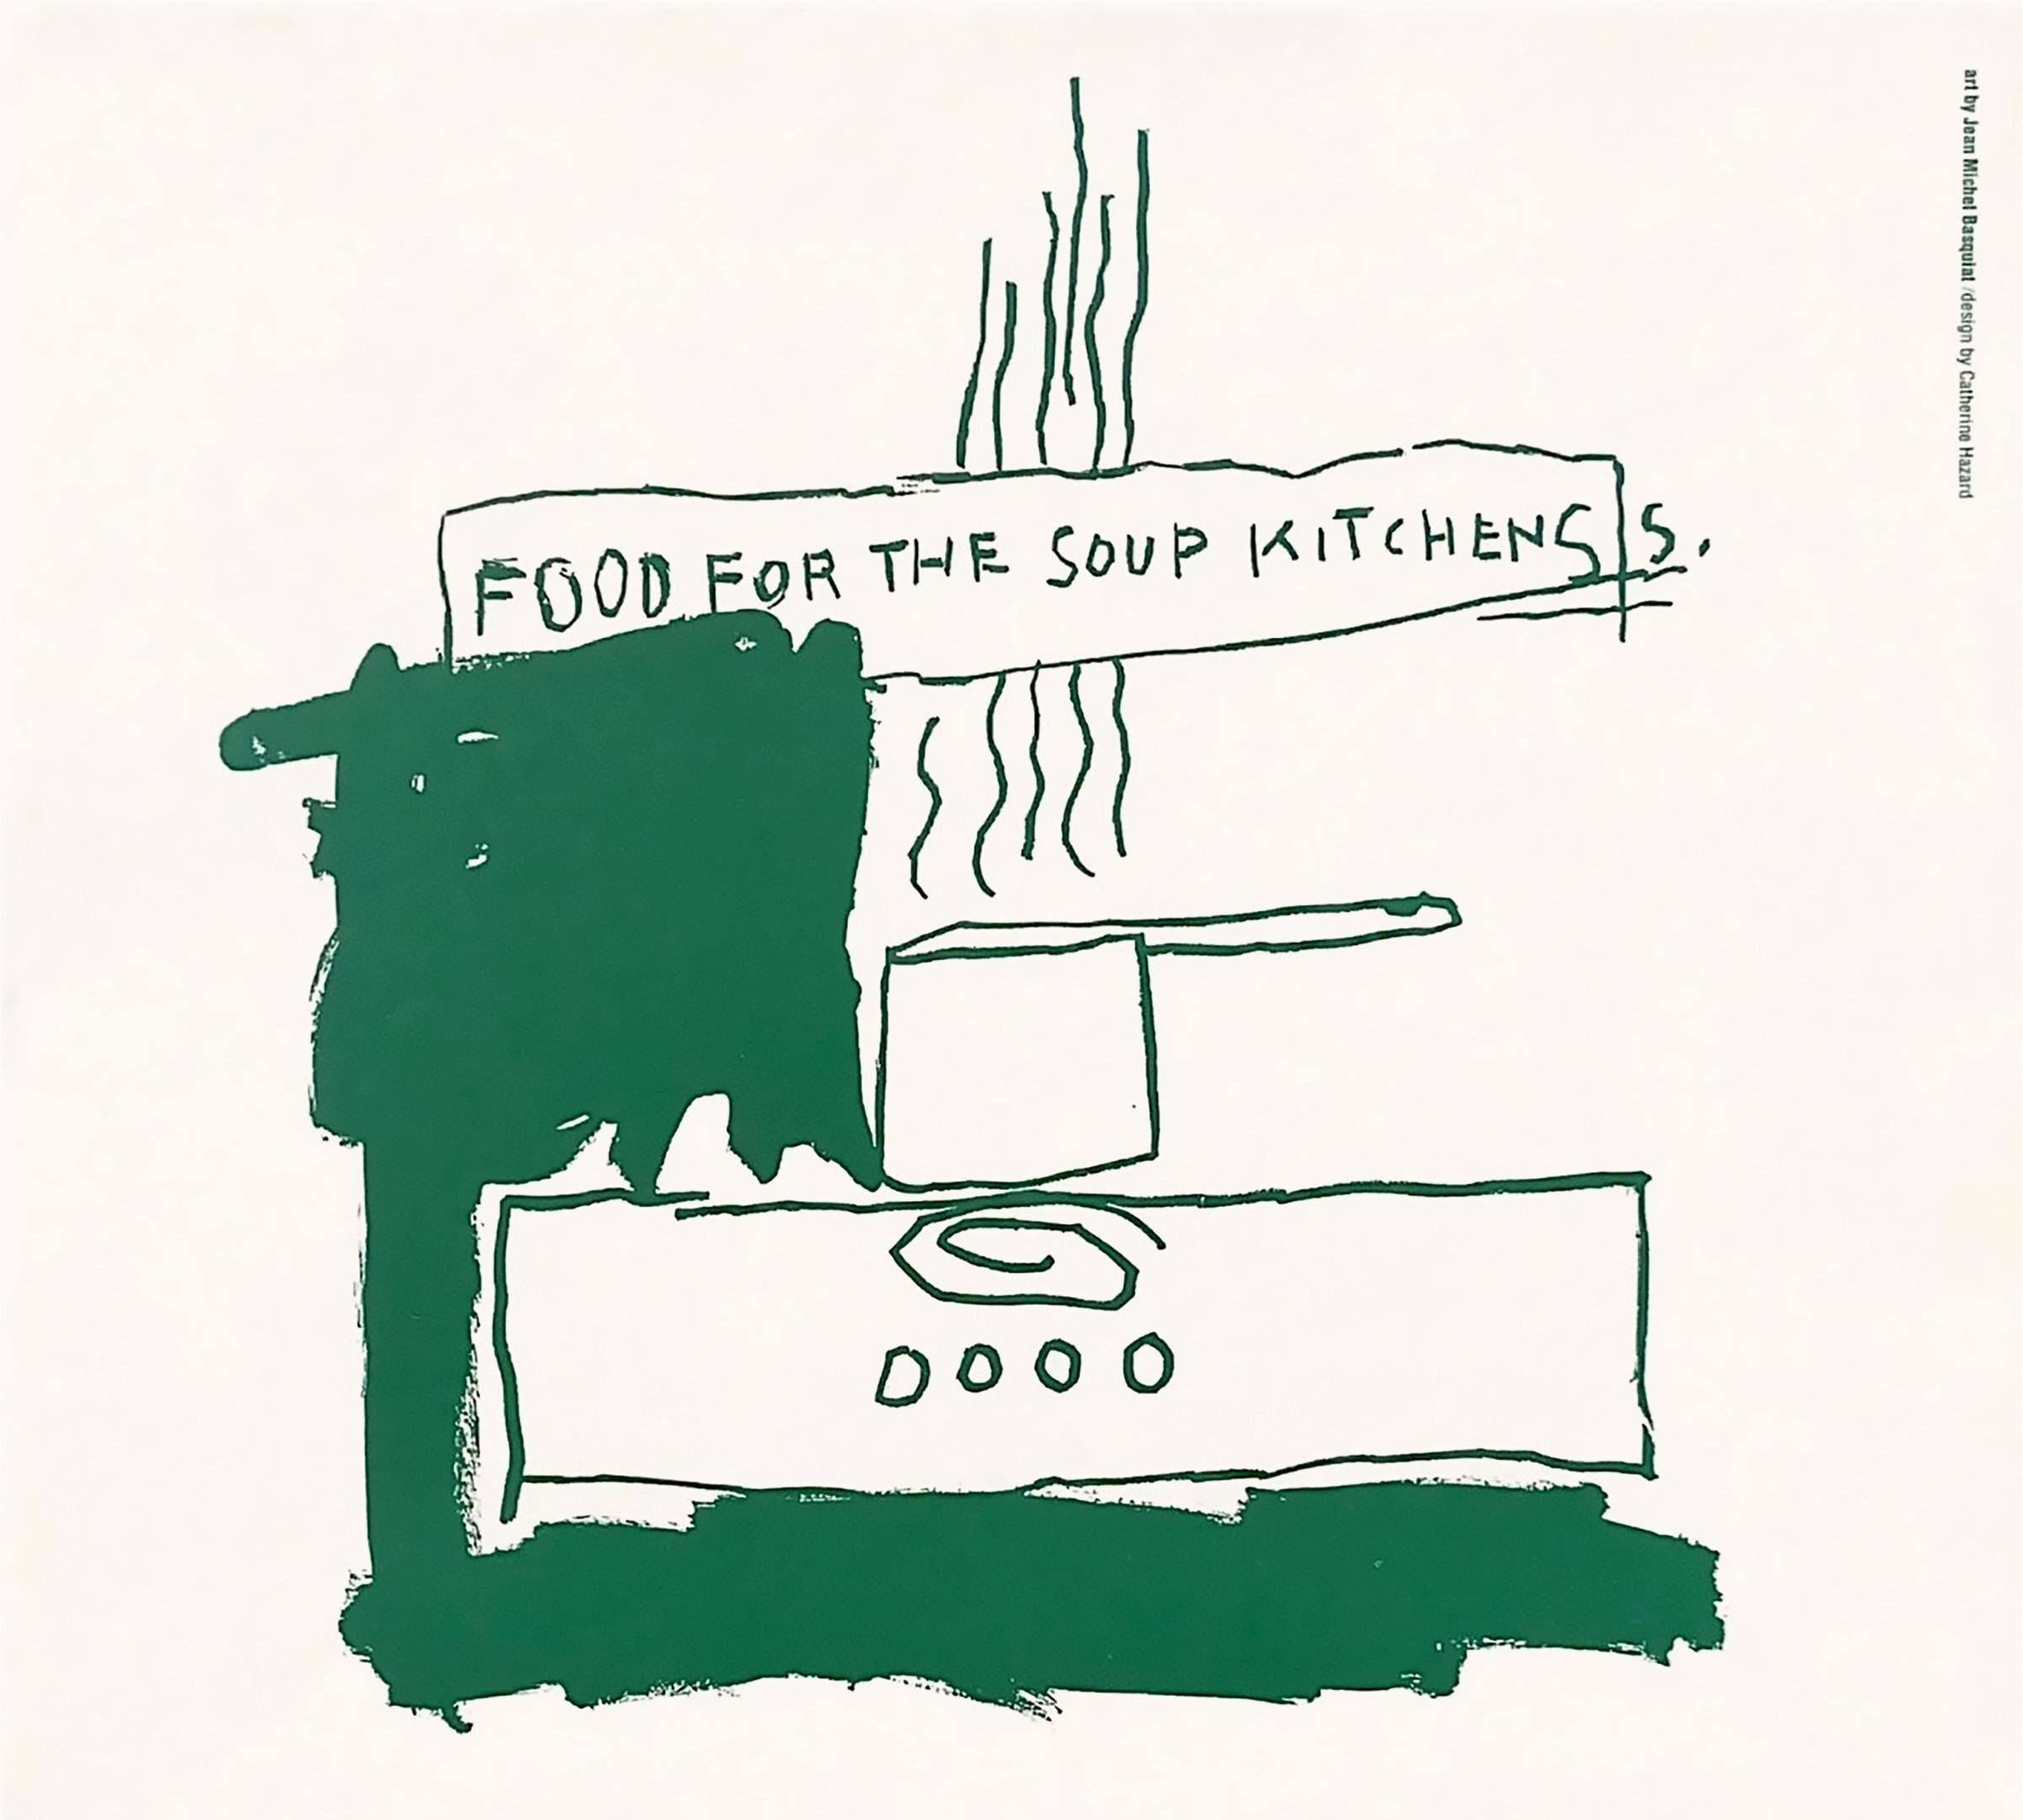 Basquiat Food for the Soup Kitchens (1983 Basquiat poster) - Print by Jean-Michel Basquiat